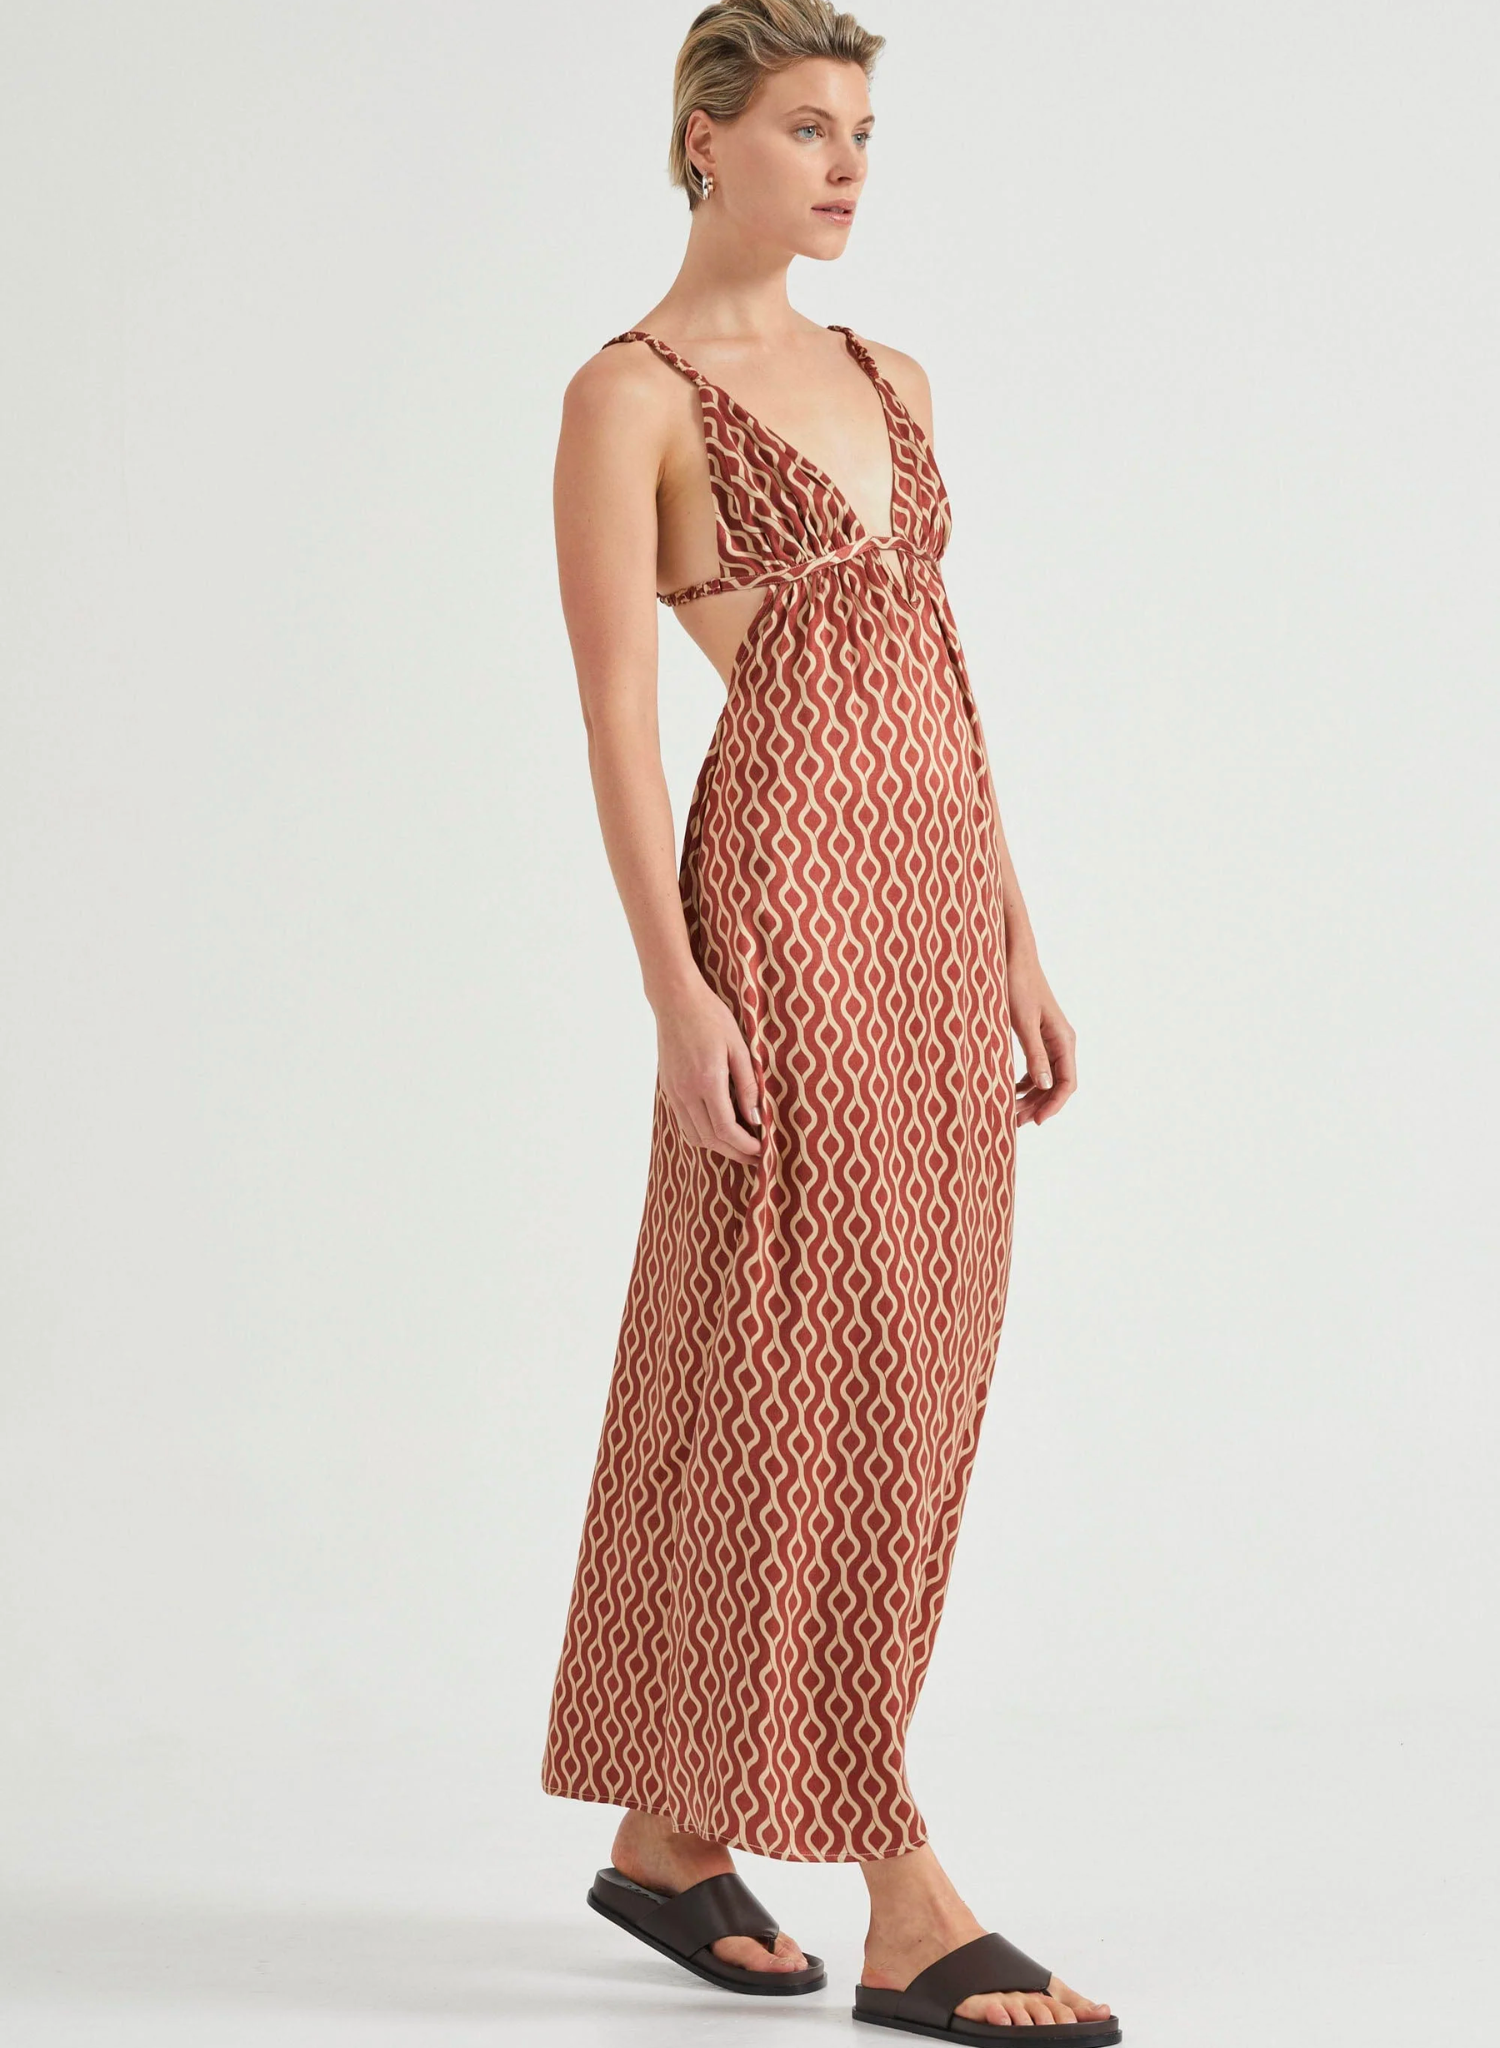 Voyage Triangle Maxi Dress in Tile